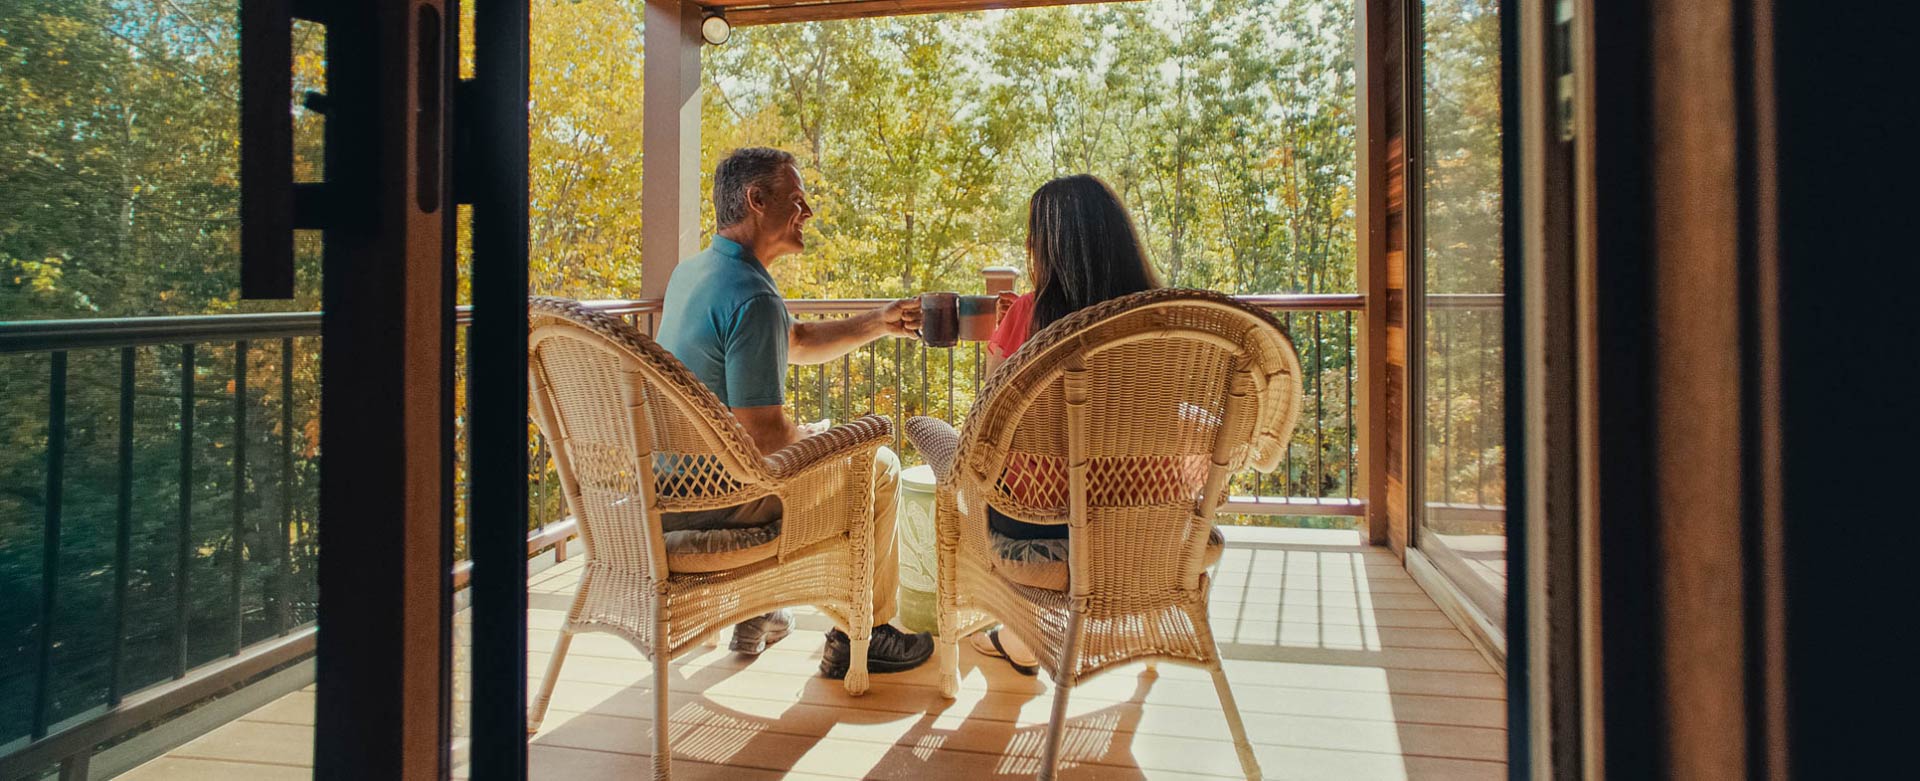 Mike and Lori look comfortable sitting on their deck in the early morning light, the two toast with coffee mugs